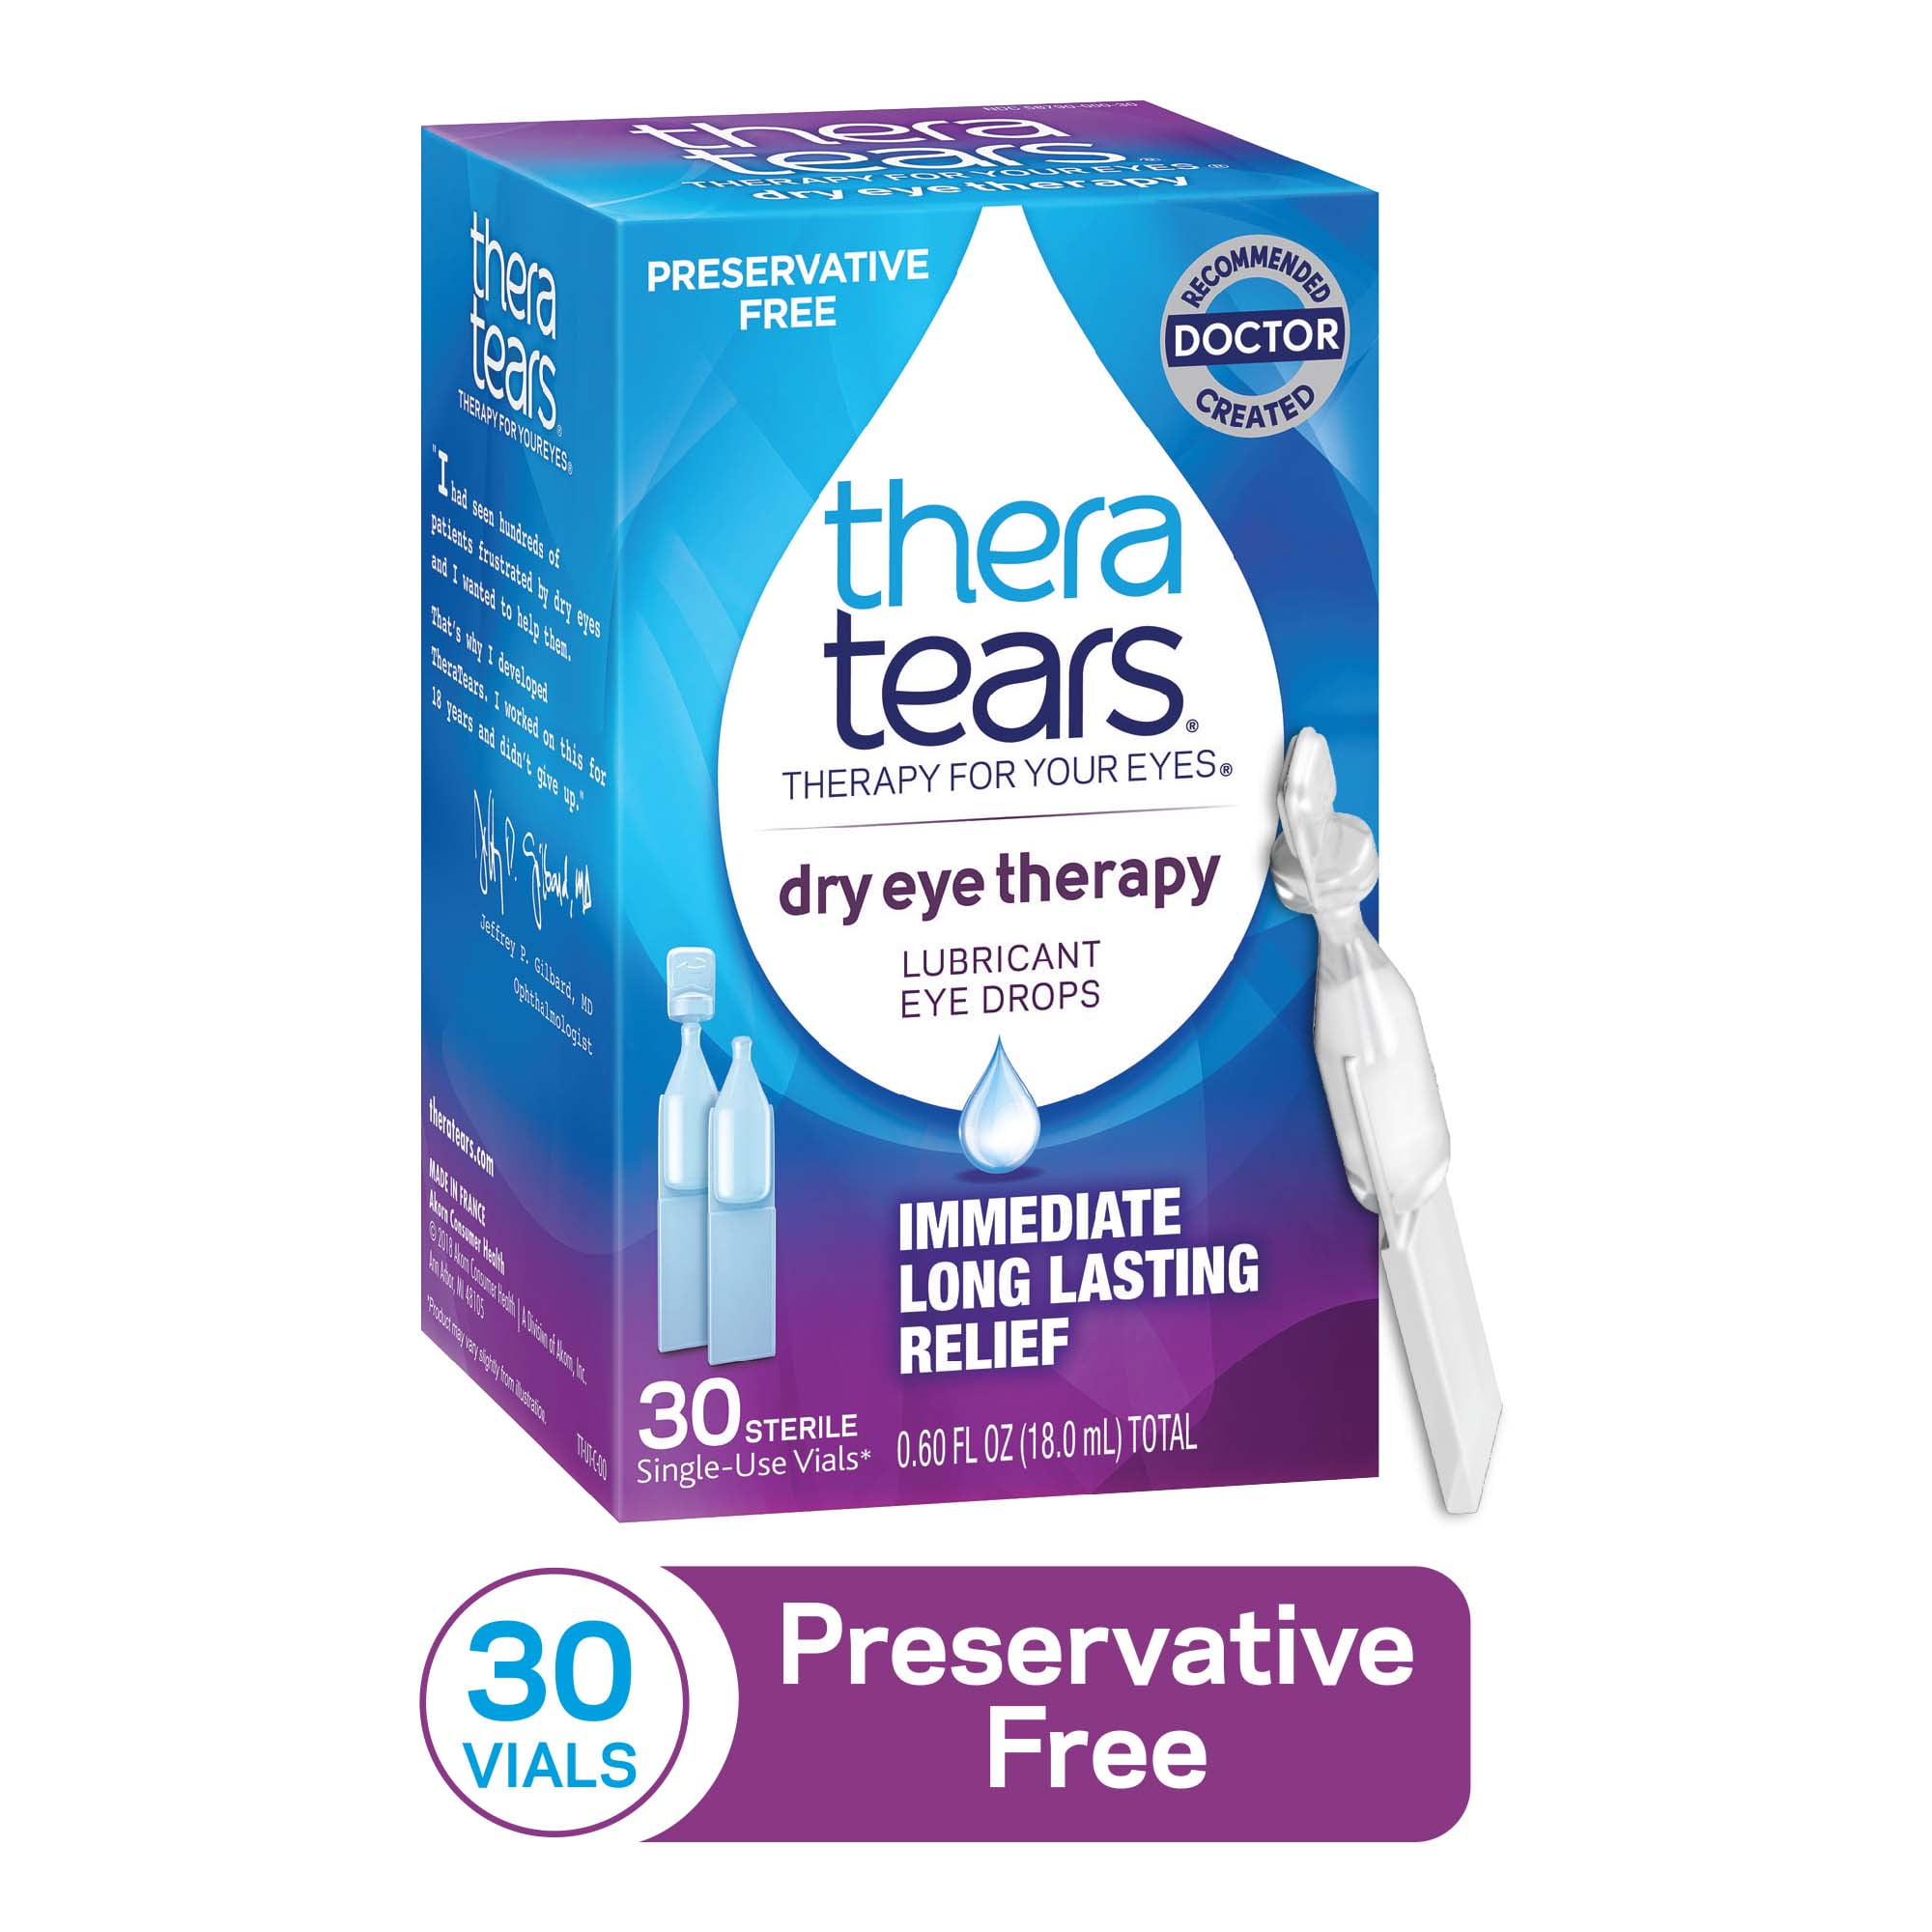 TheraTears Dry Eye Therapy Lubricant Eye Drops, Preservative Free, 30 Vials